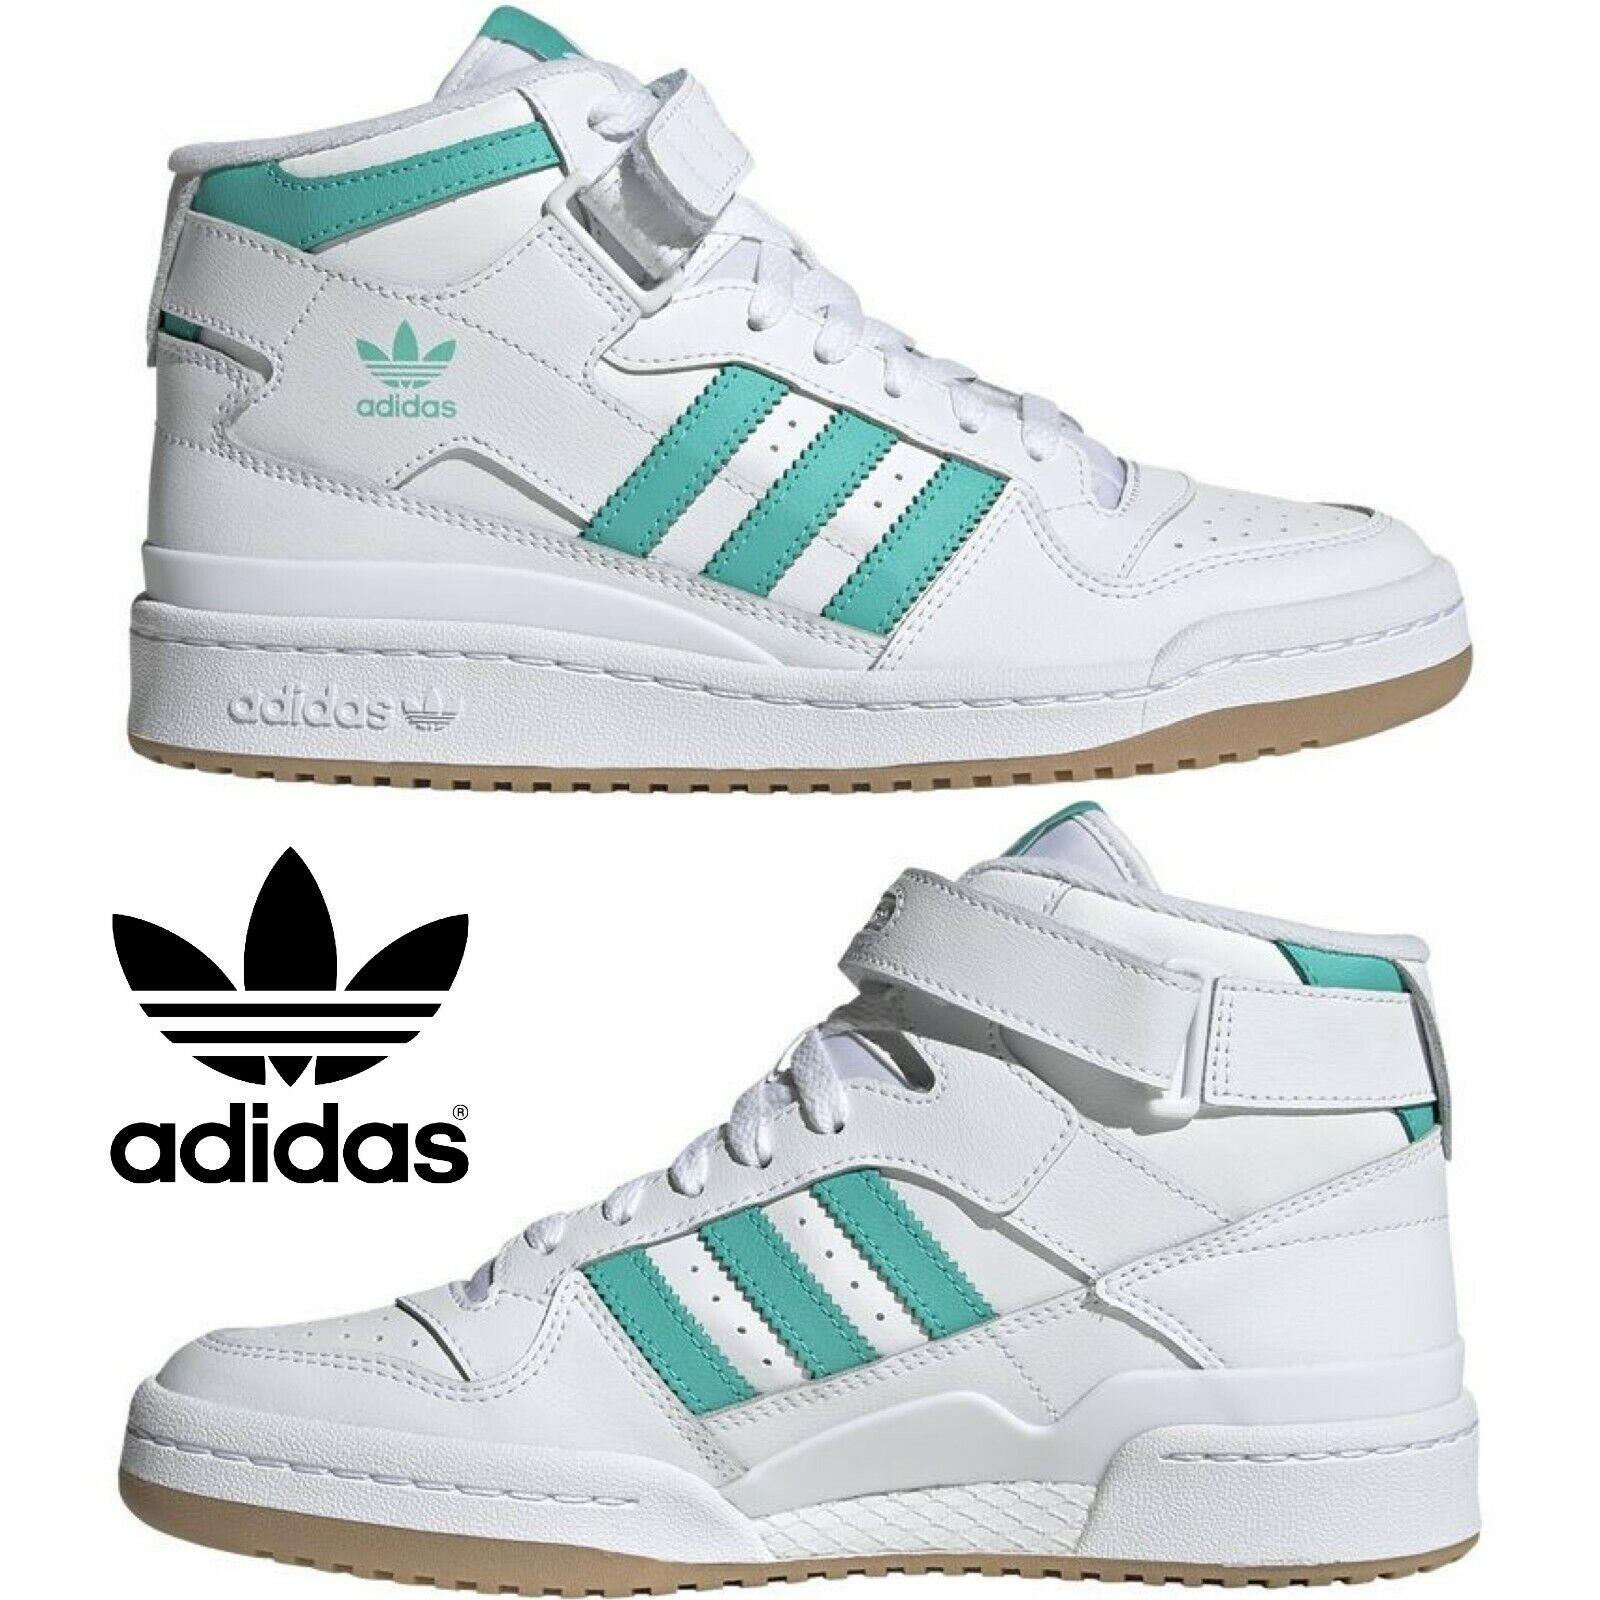 Adidas Originals Forum Mid Women`s Sneakers Comfort Casual Shoes White Mint